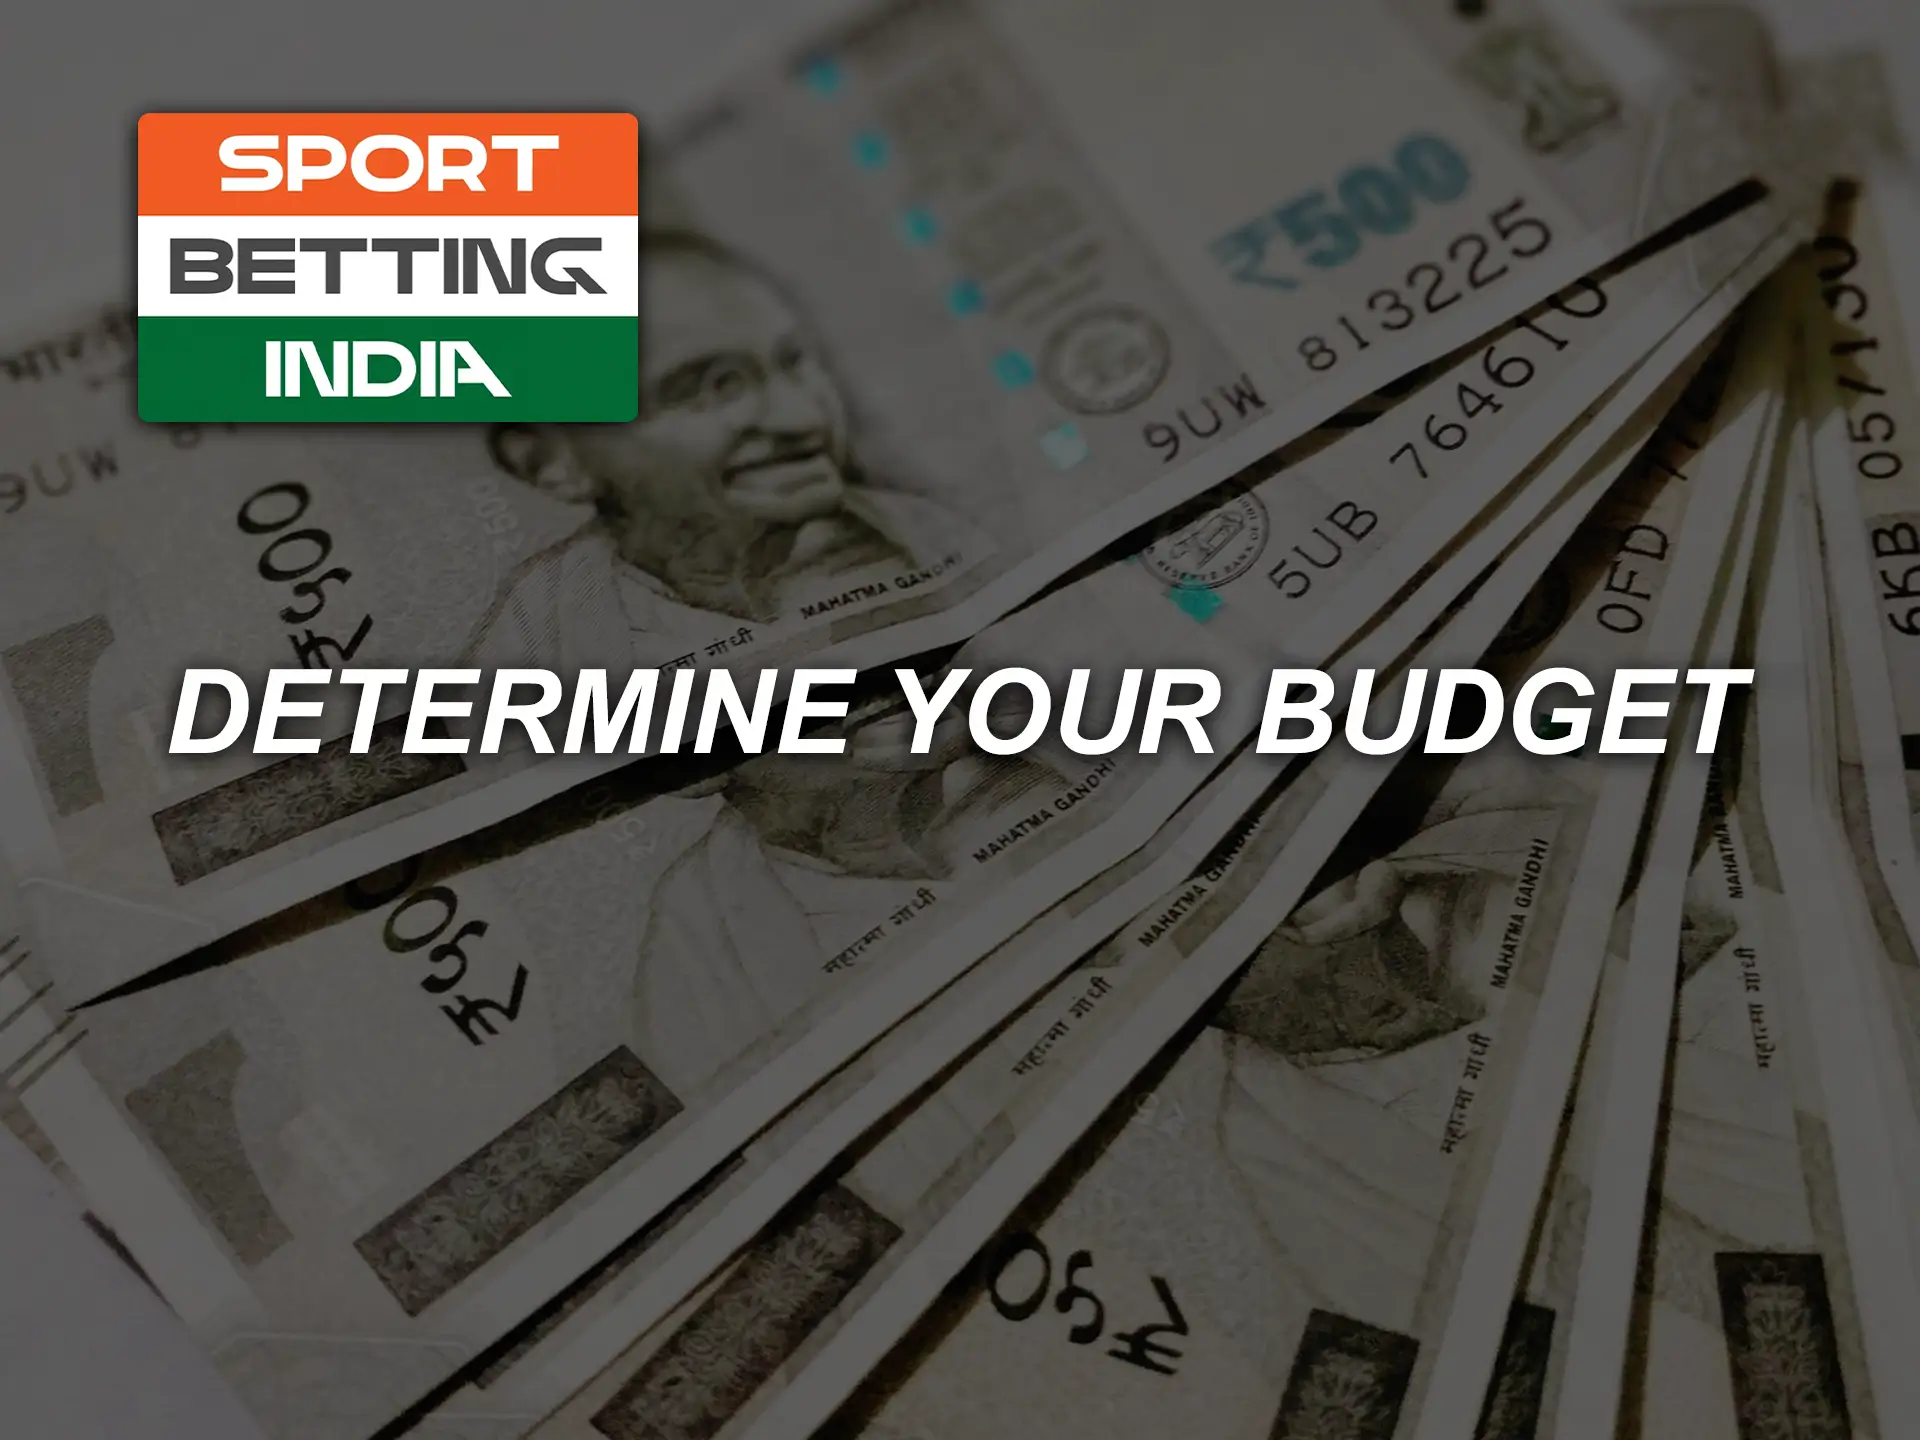 Pay attention to your budget and keep track of your rates and amounts.